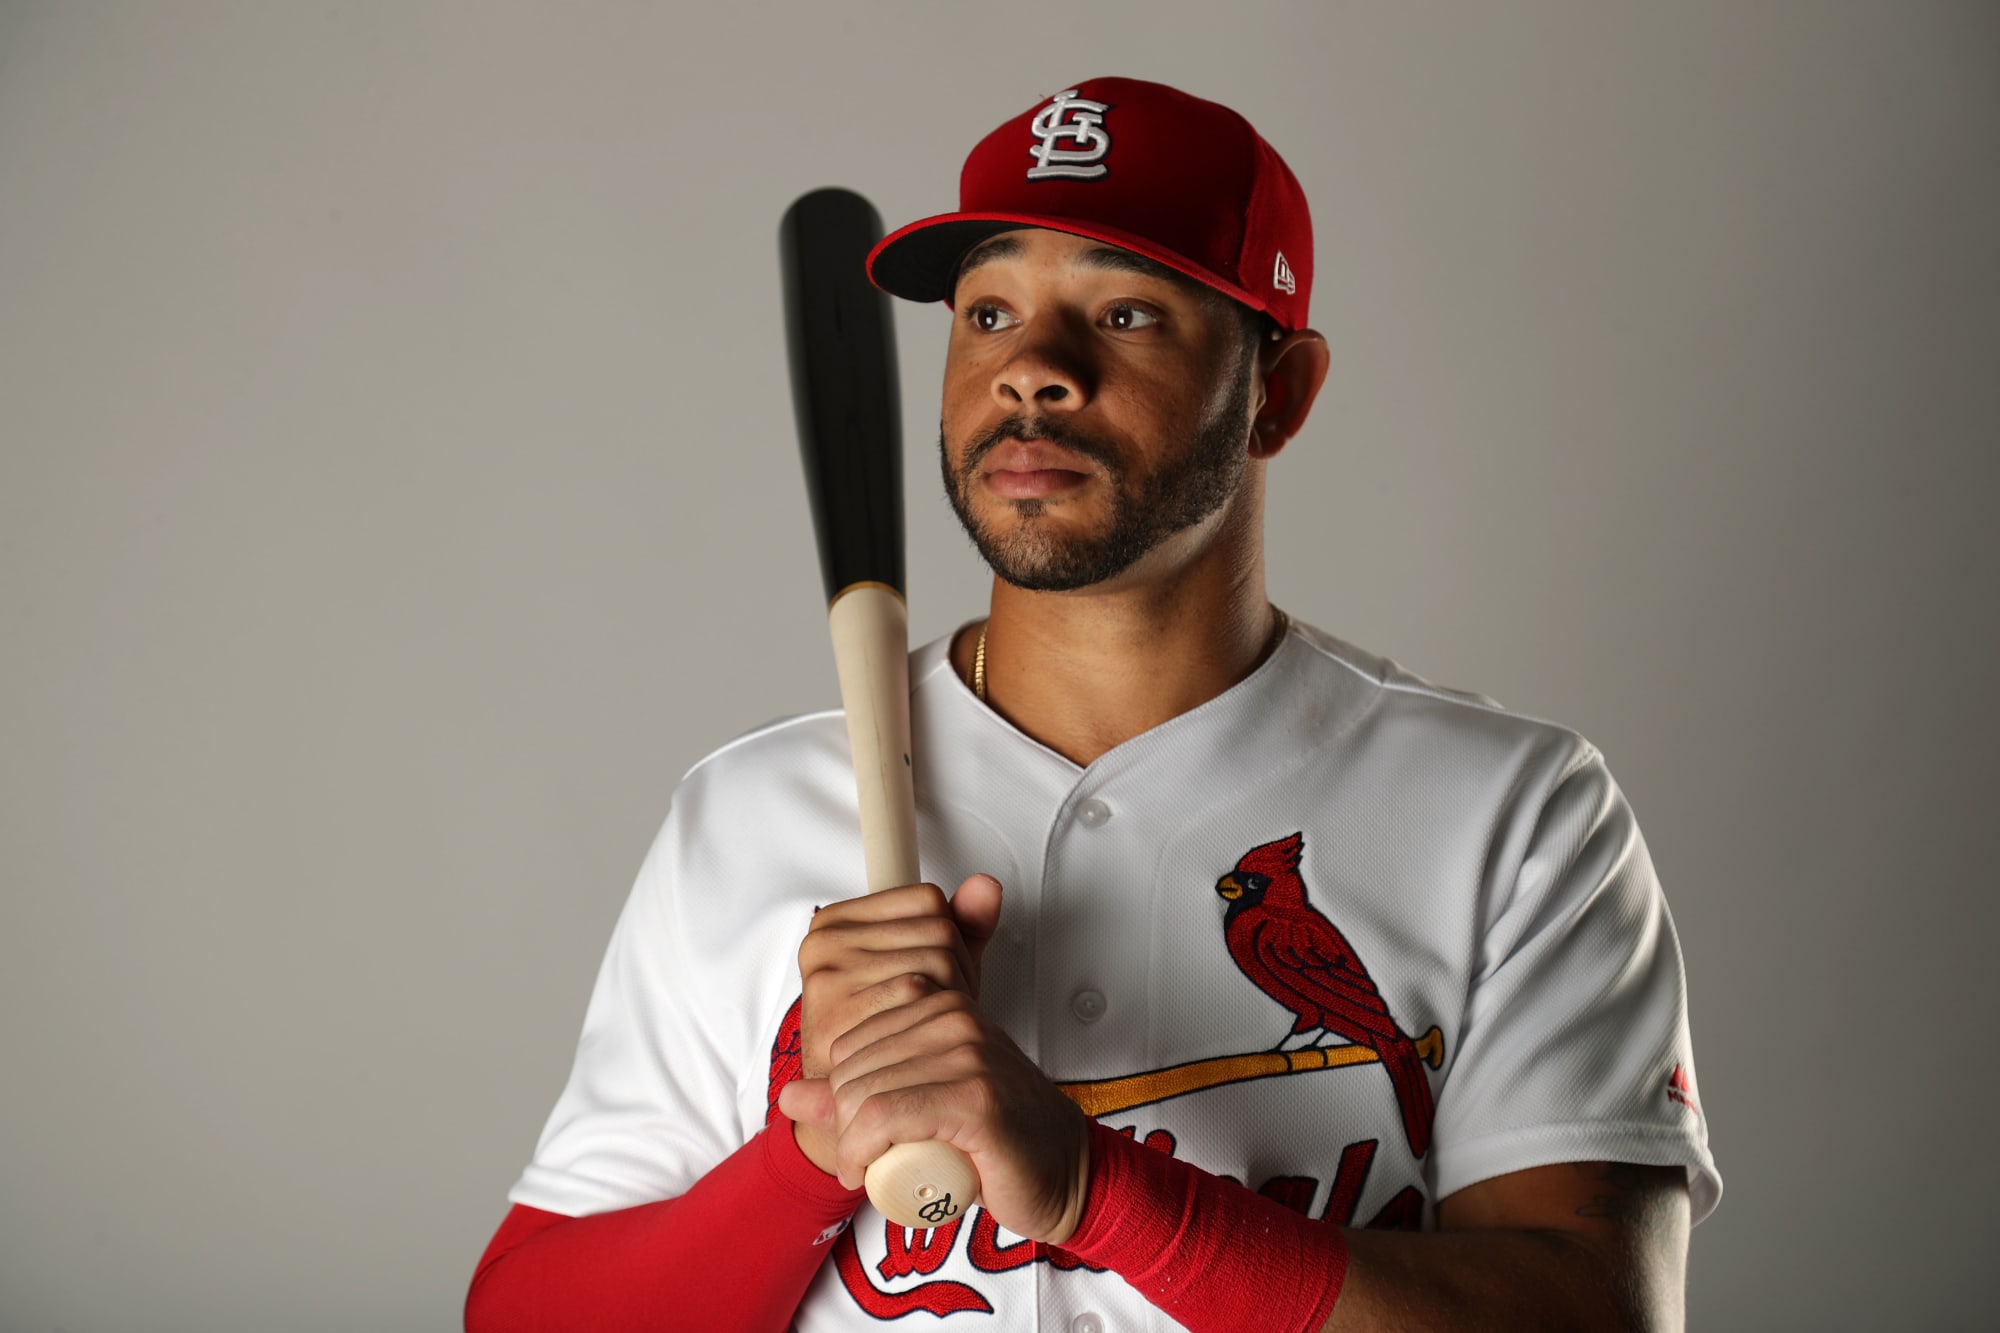 Tommy Pham on X: #Cardinalnation World Series Champ in the house  @adron_chambers  / X